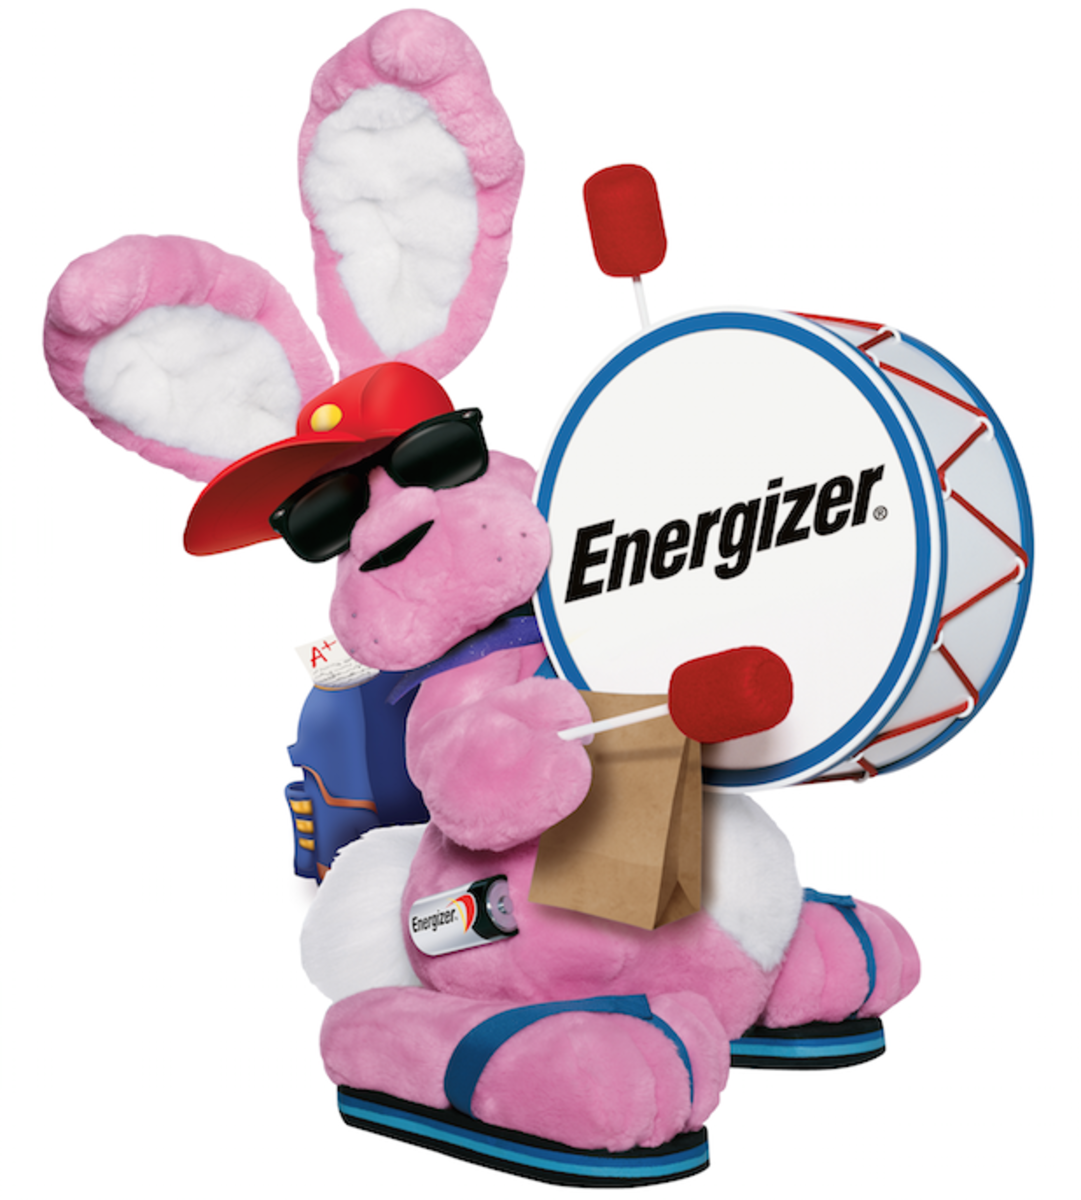 Energizer Instant Win Contest